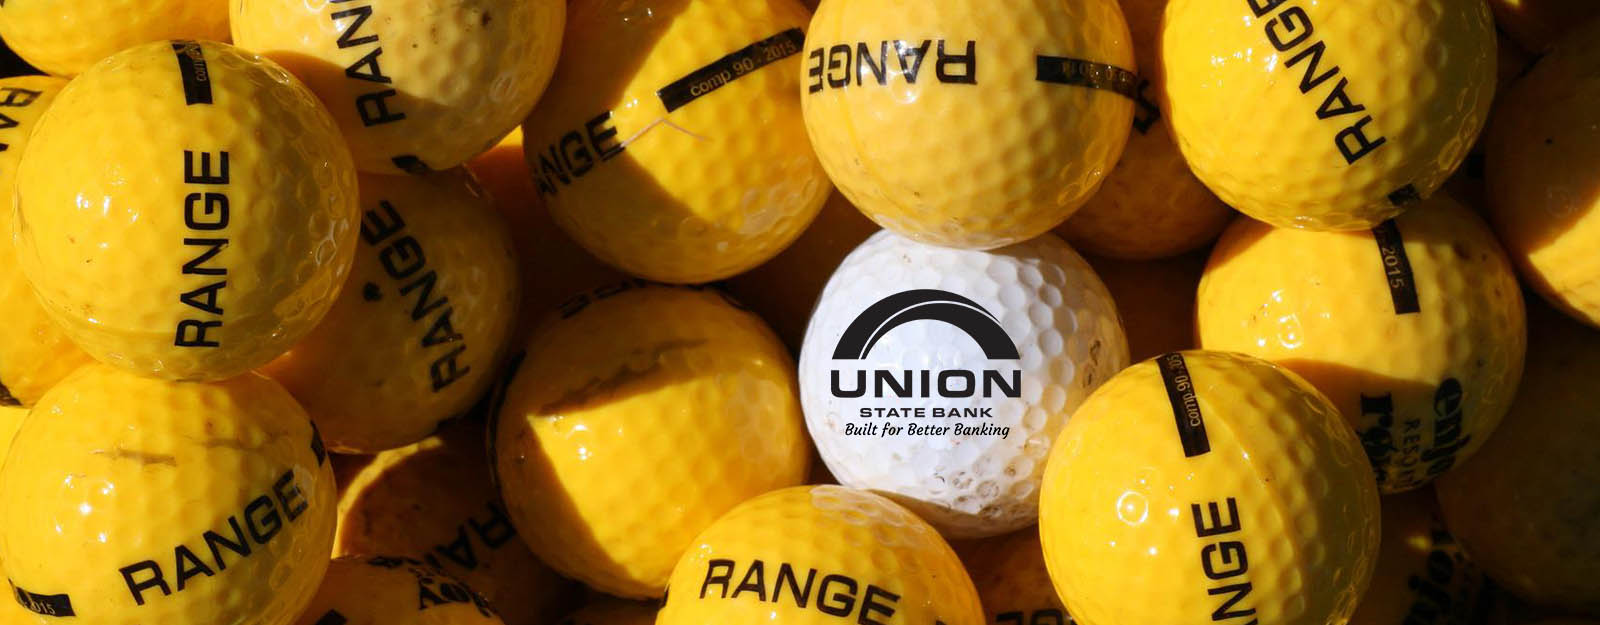 A close up photograph of a pile of yellow golf balls and one white golf ball with the Union State Bank logo in the center.